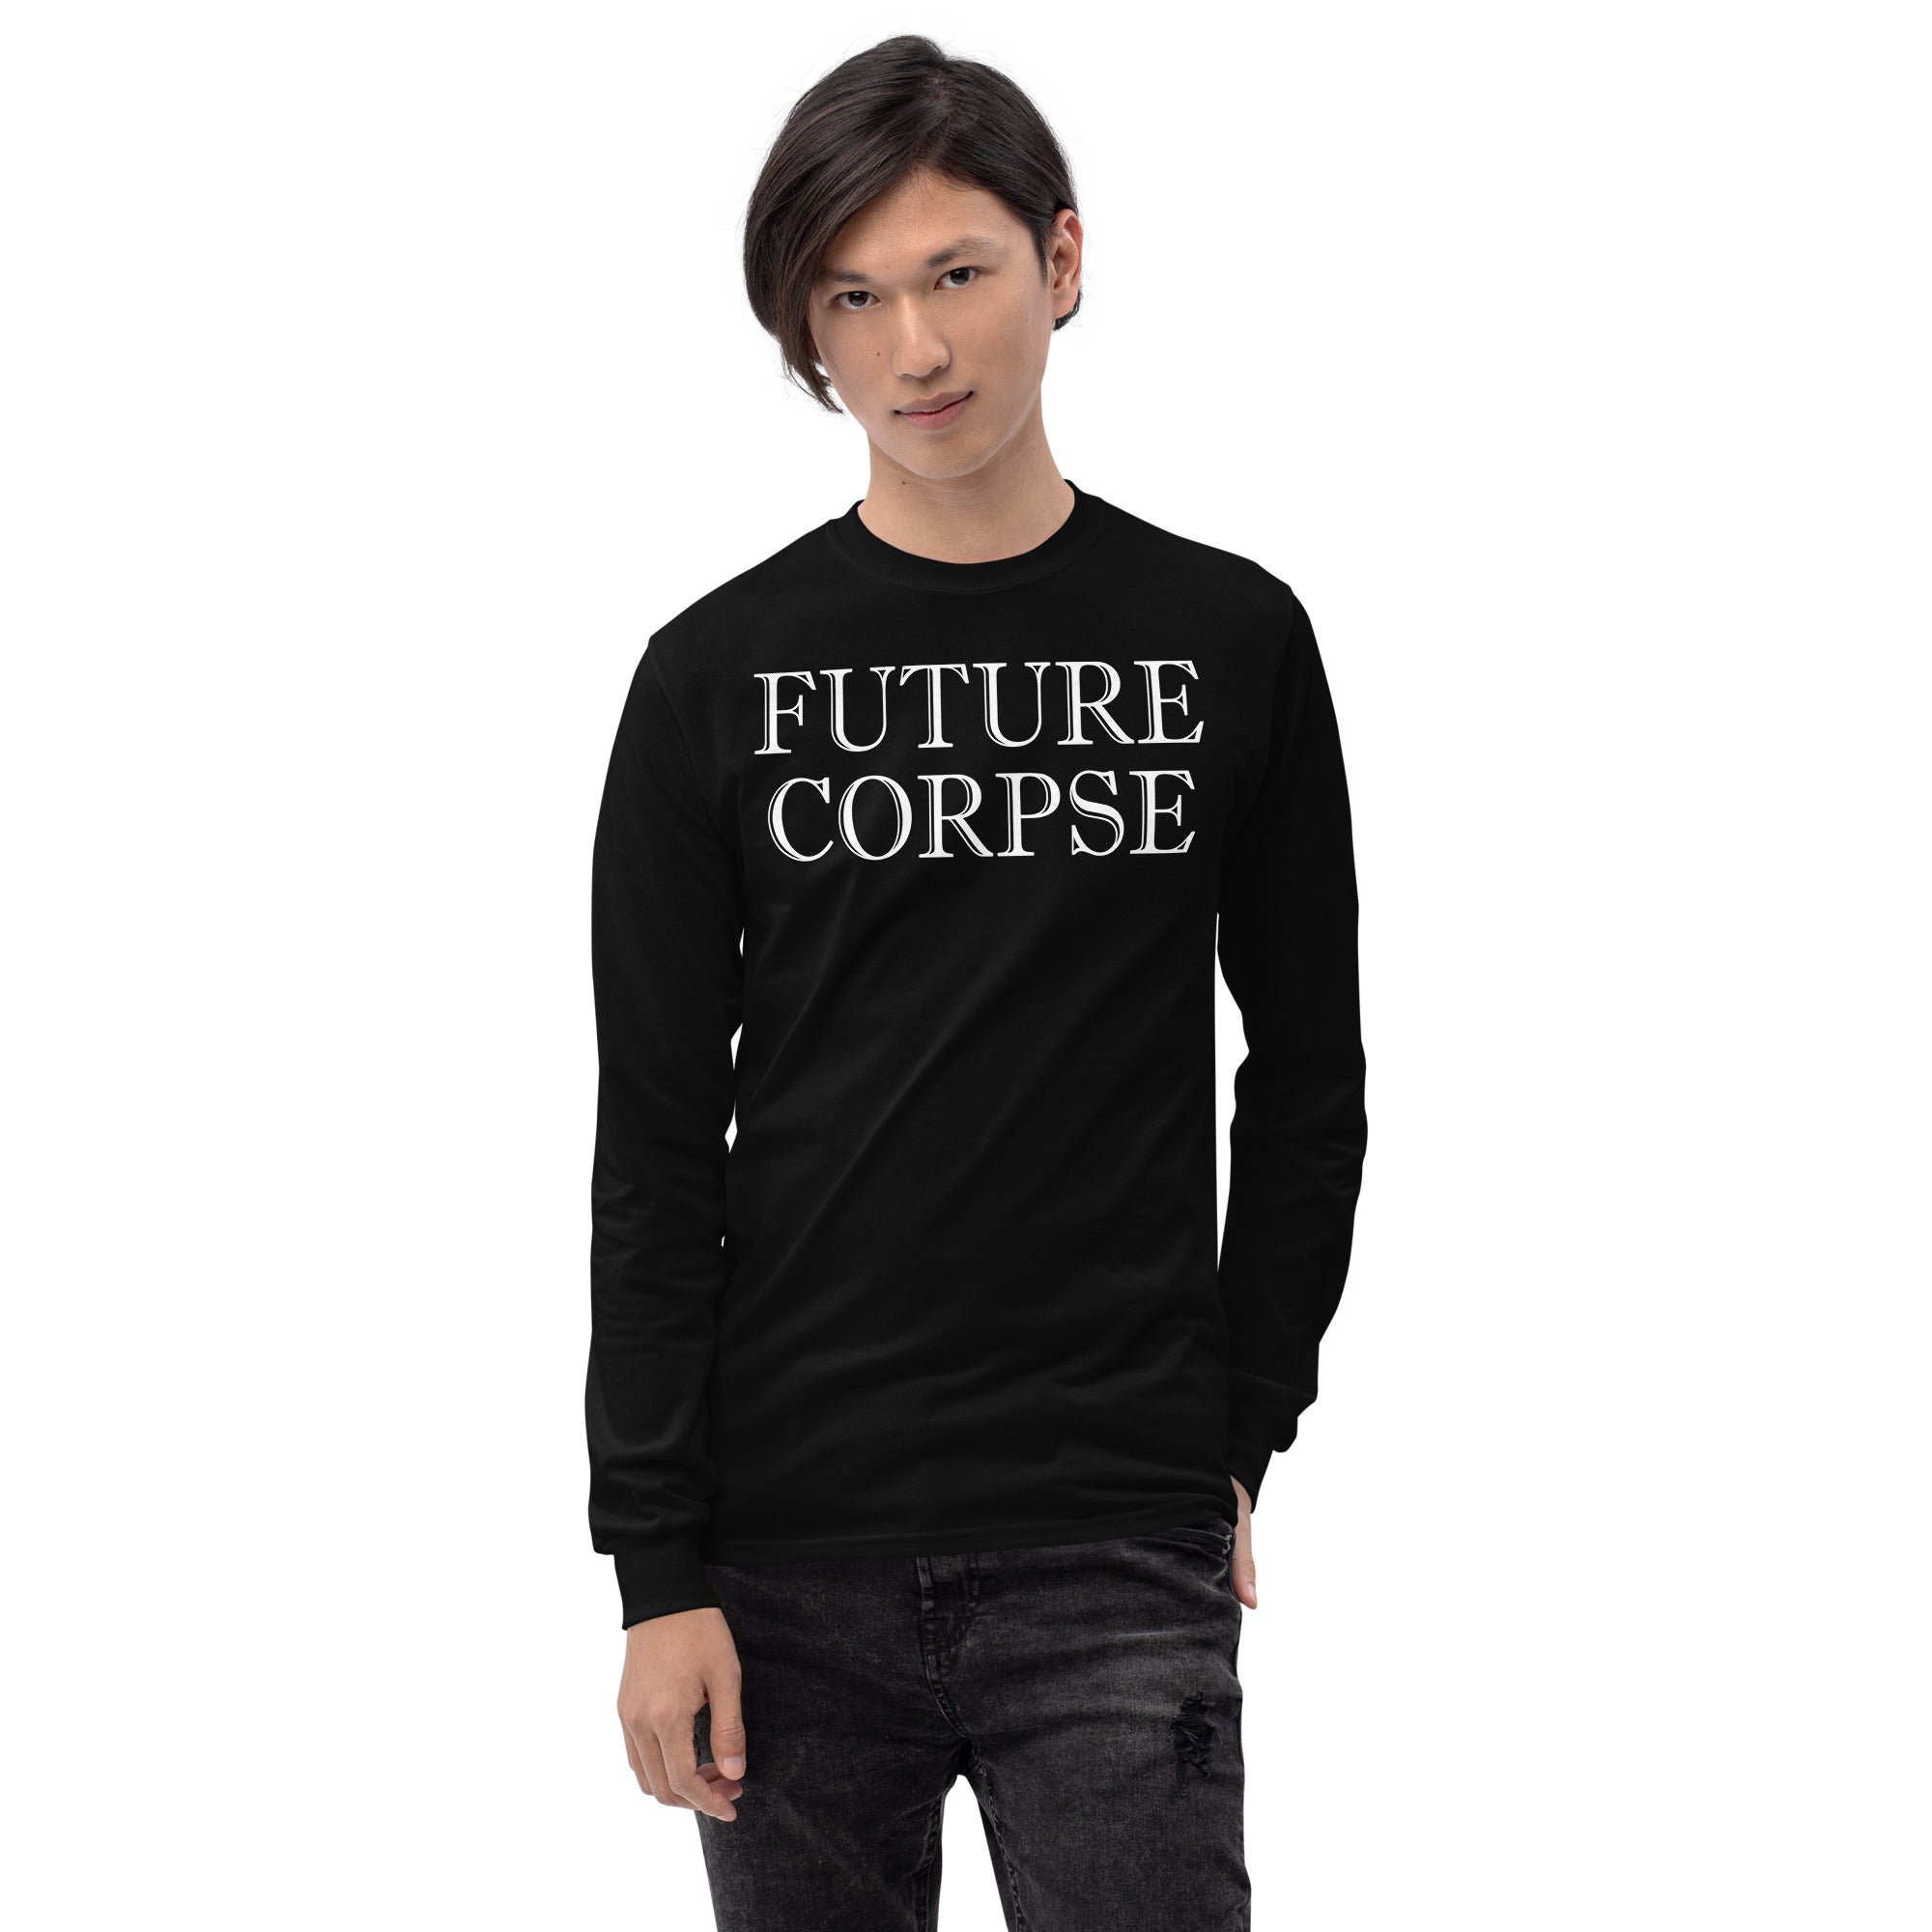 Future Corpse Ultimate Demise Long Sleeve Shirt - Edge of Life Designs